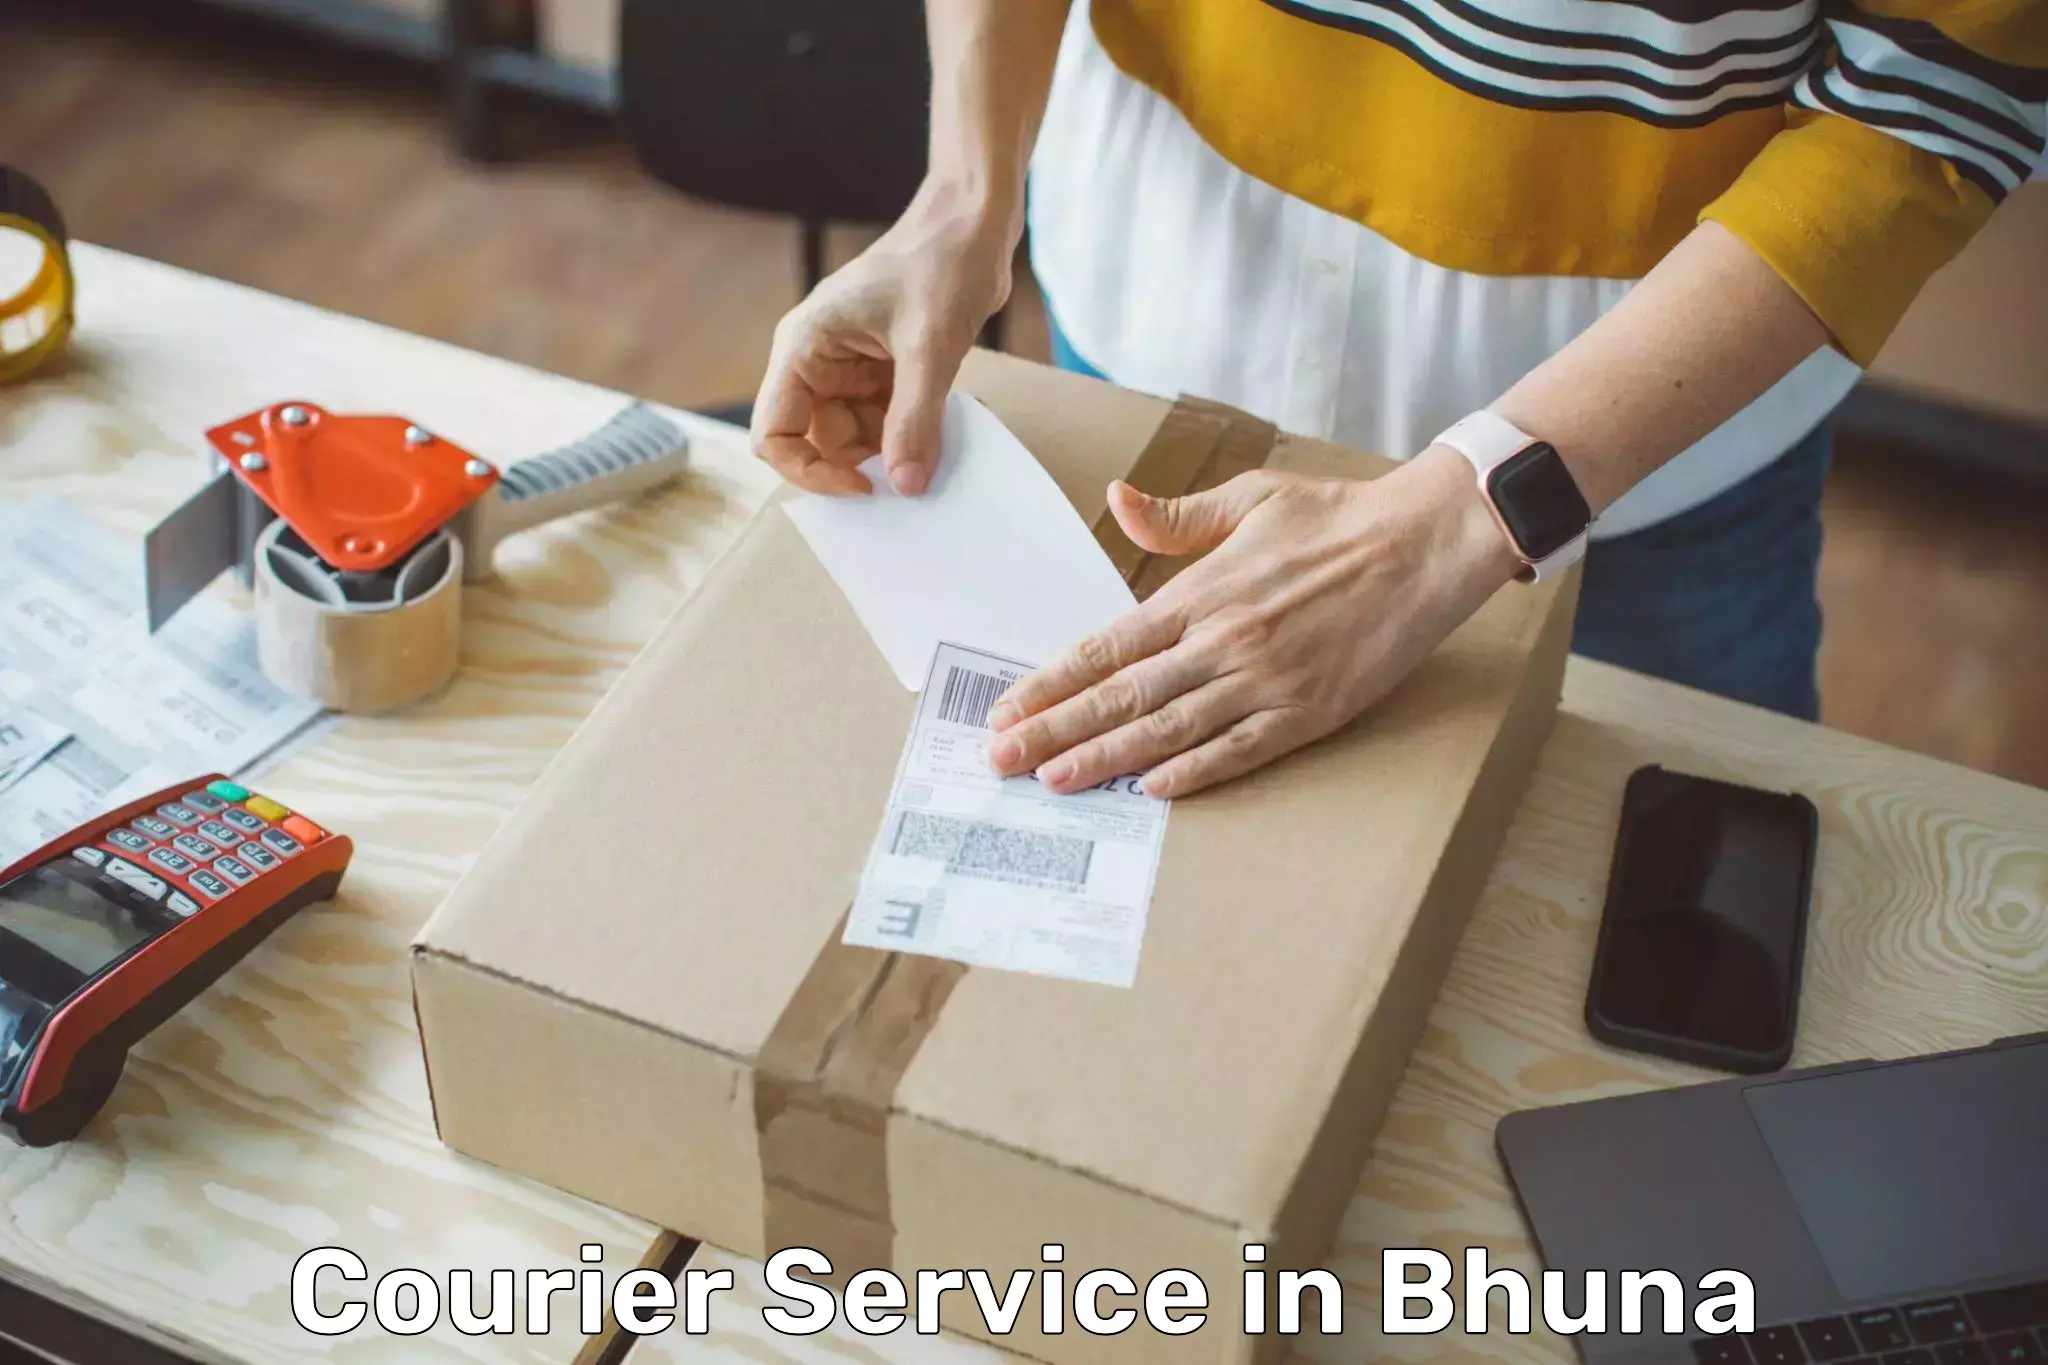 Specialized shipment handling in Bhuna